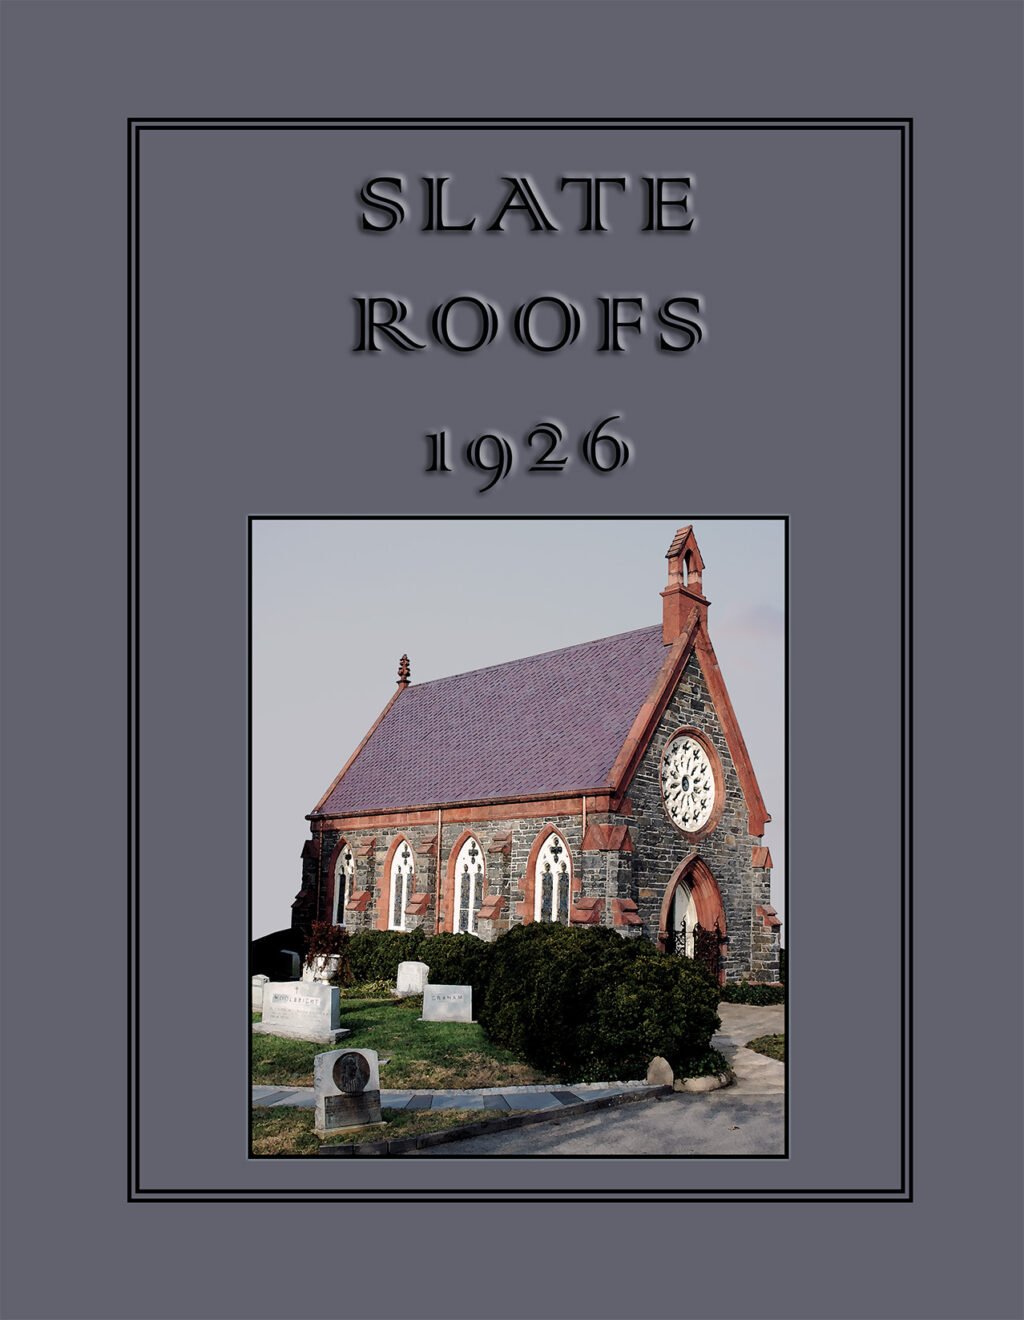 The Slate Roofs 1926 cover